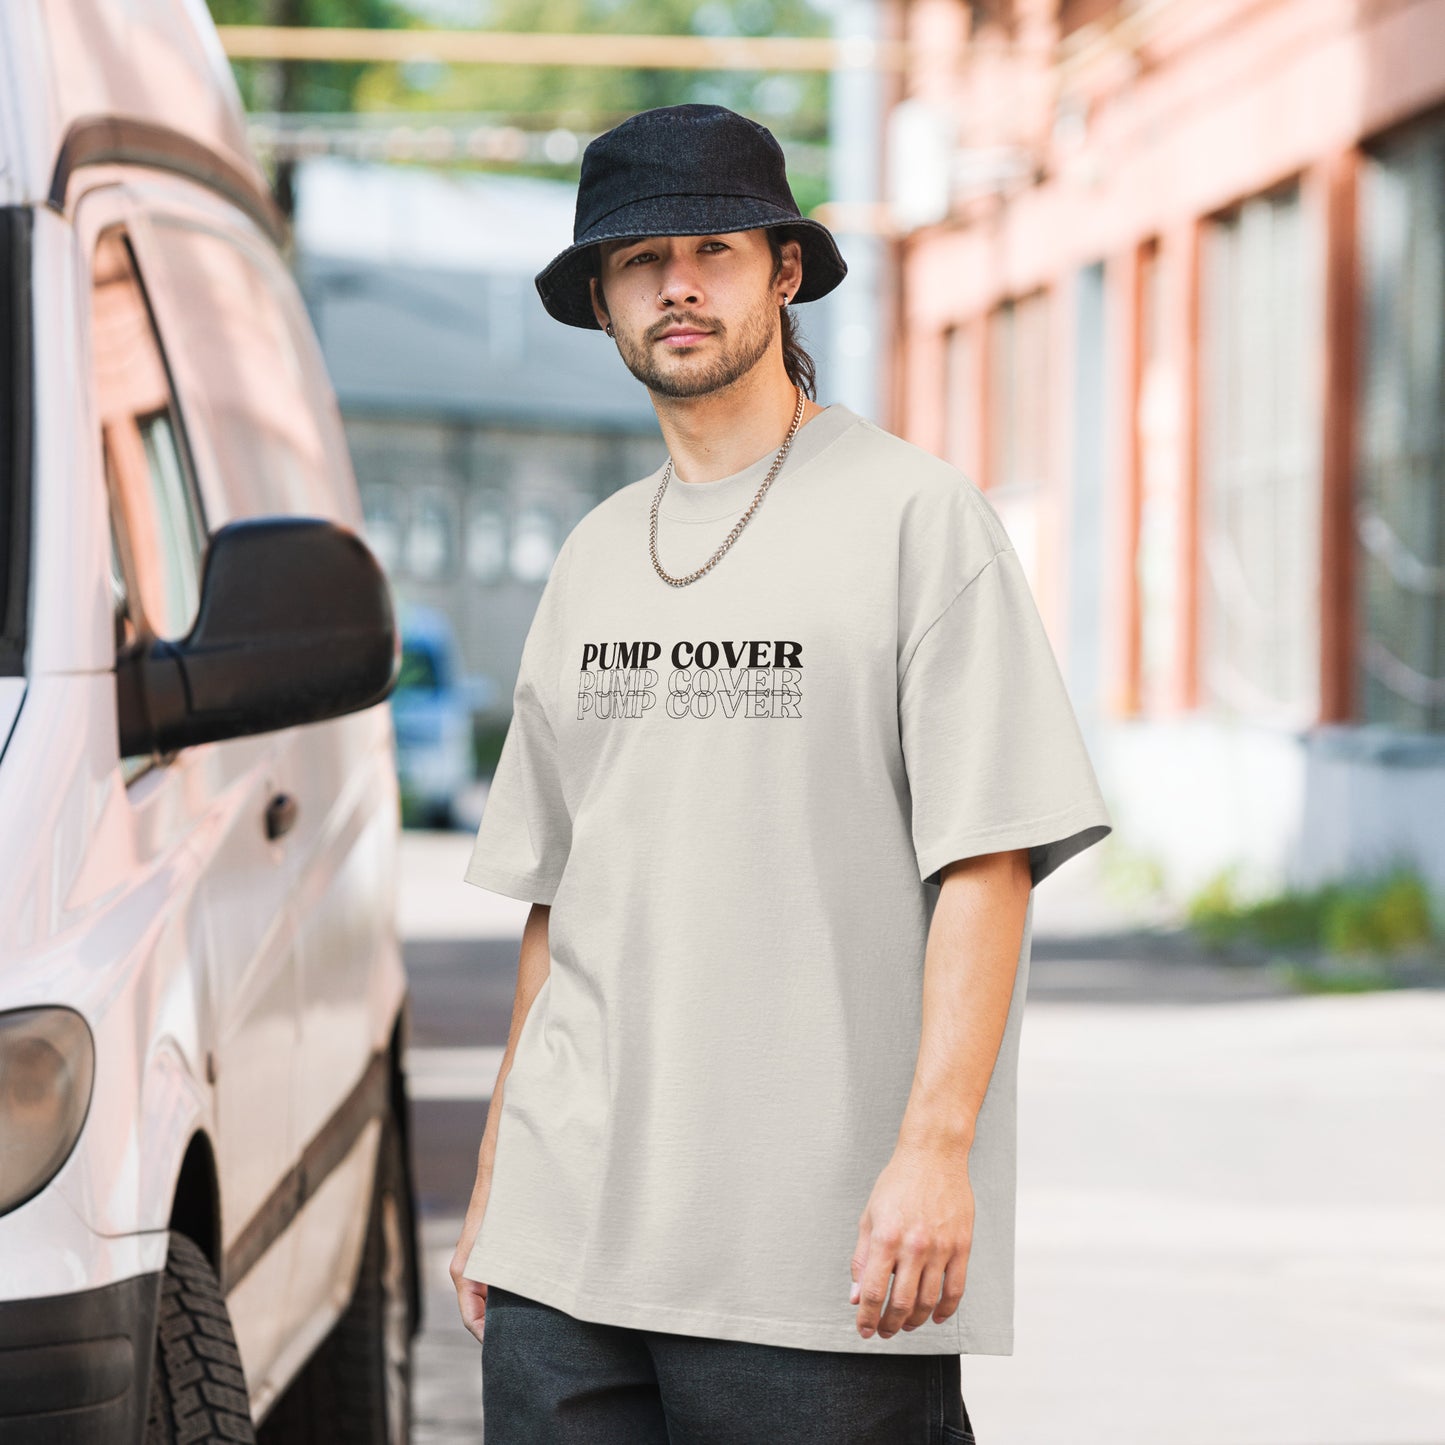 Oversized Pump Cover Tee